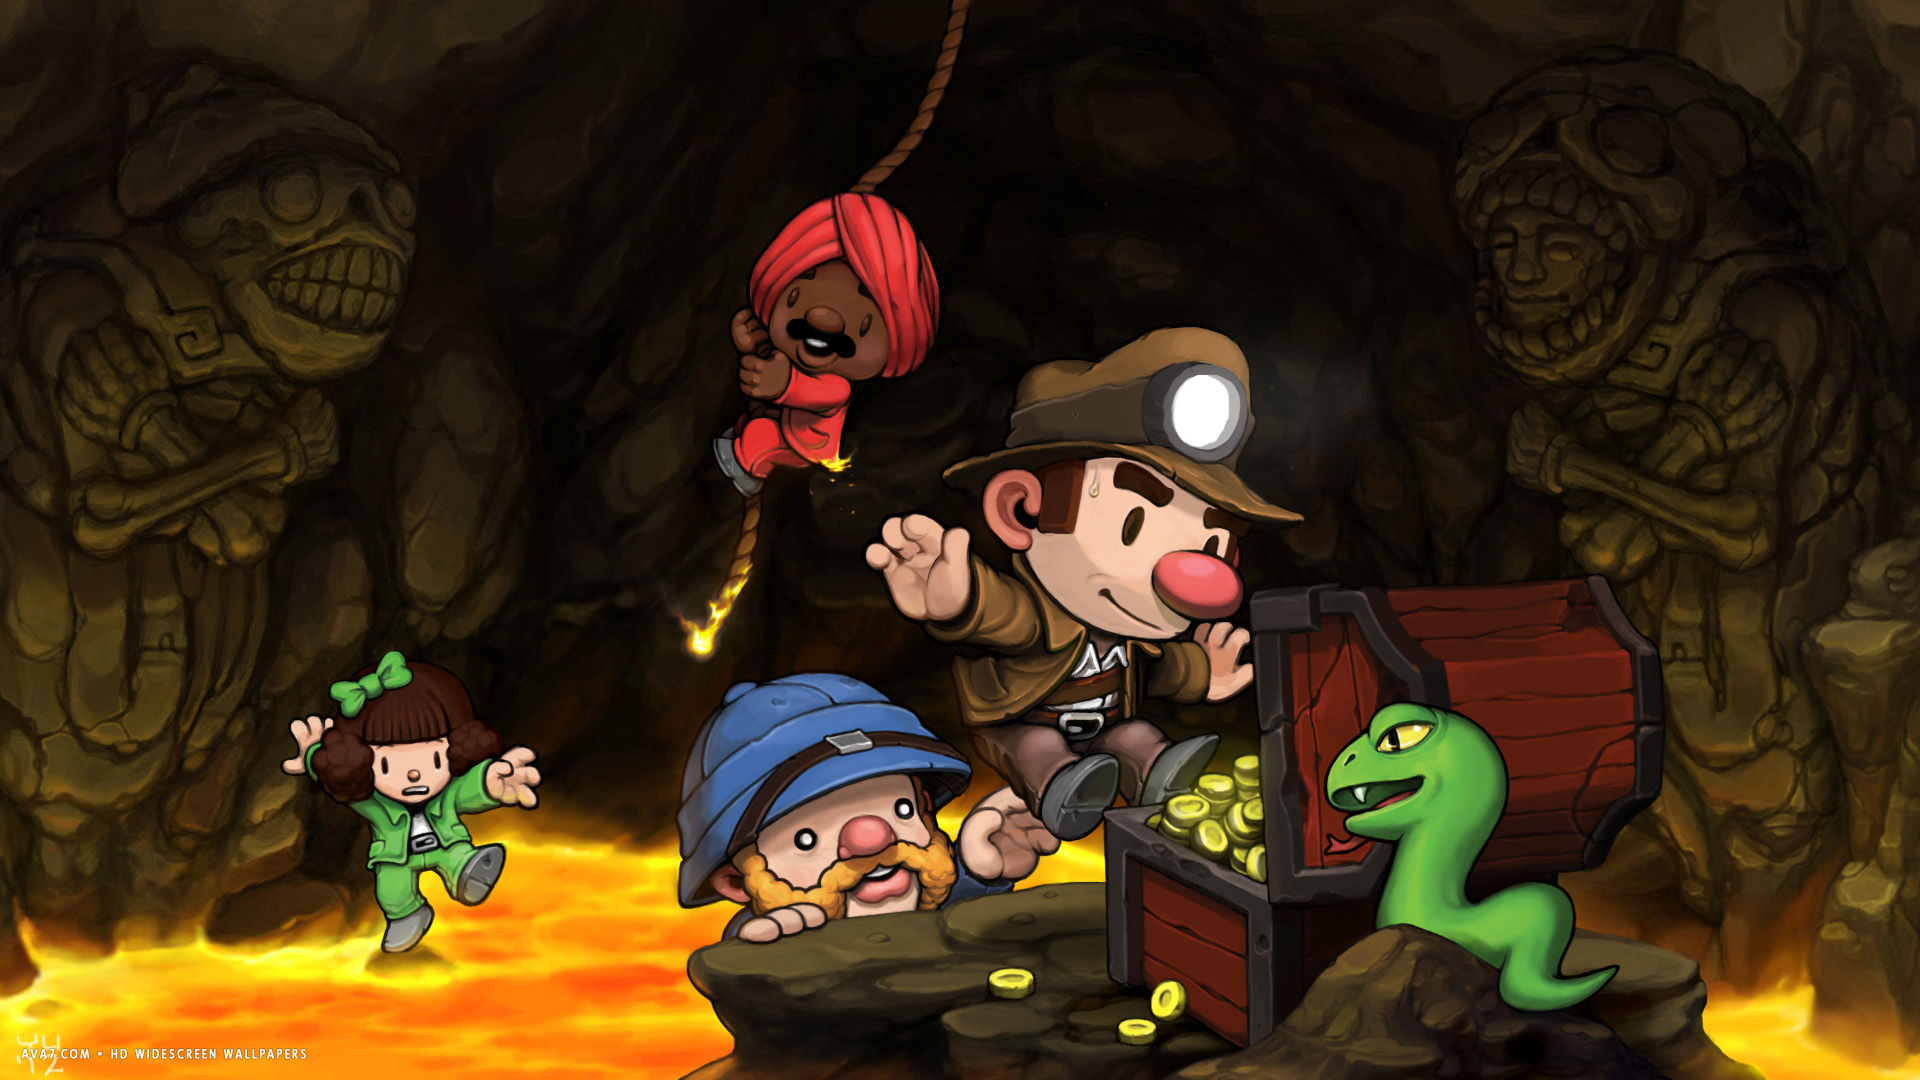 Spelunky Game HD Widescreen Wallpaper Games Background